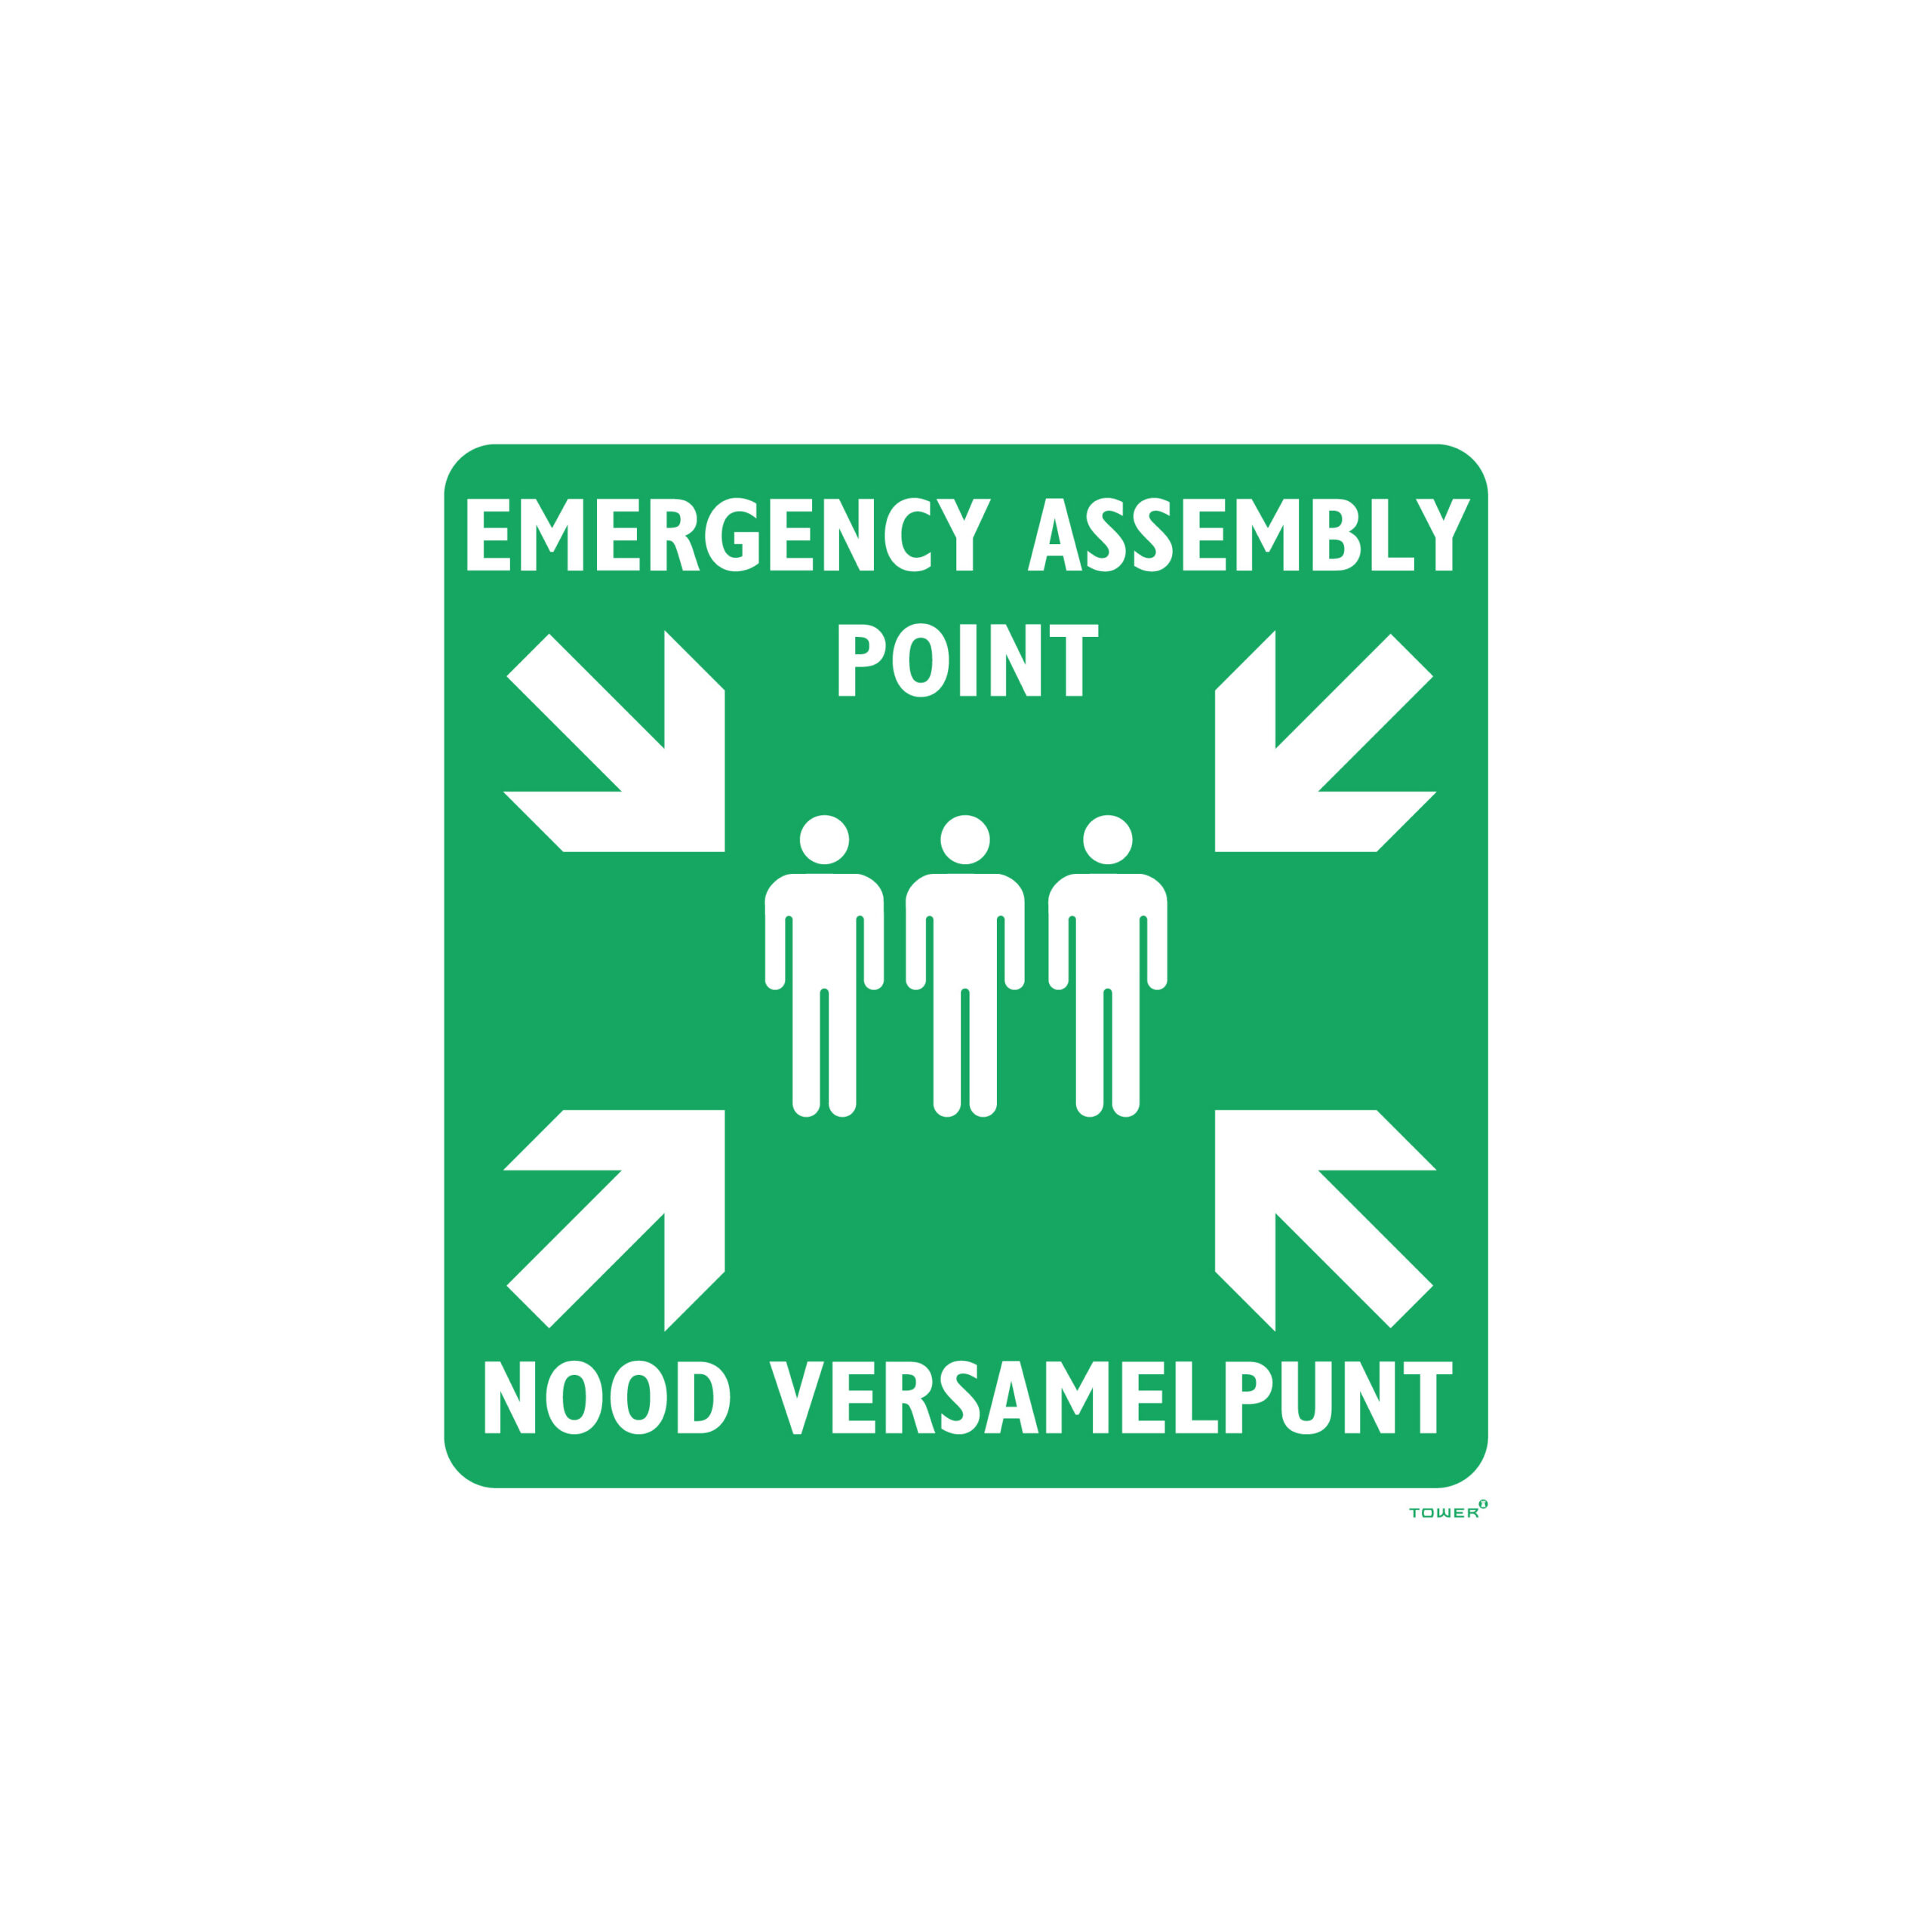 TOWER 
"EMERGENCY
ASSEMBLY"
SIGNAGE 
190x190mm